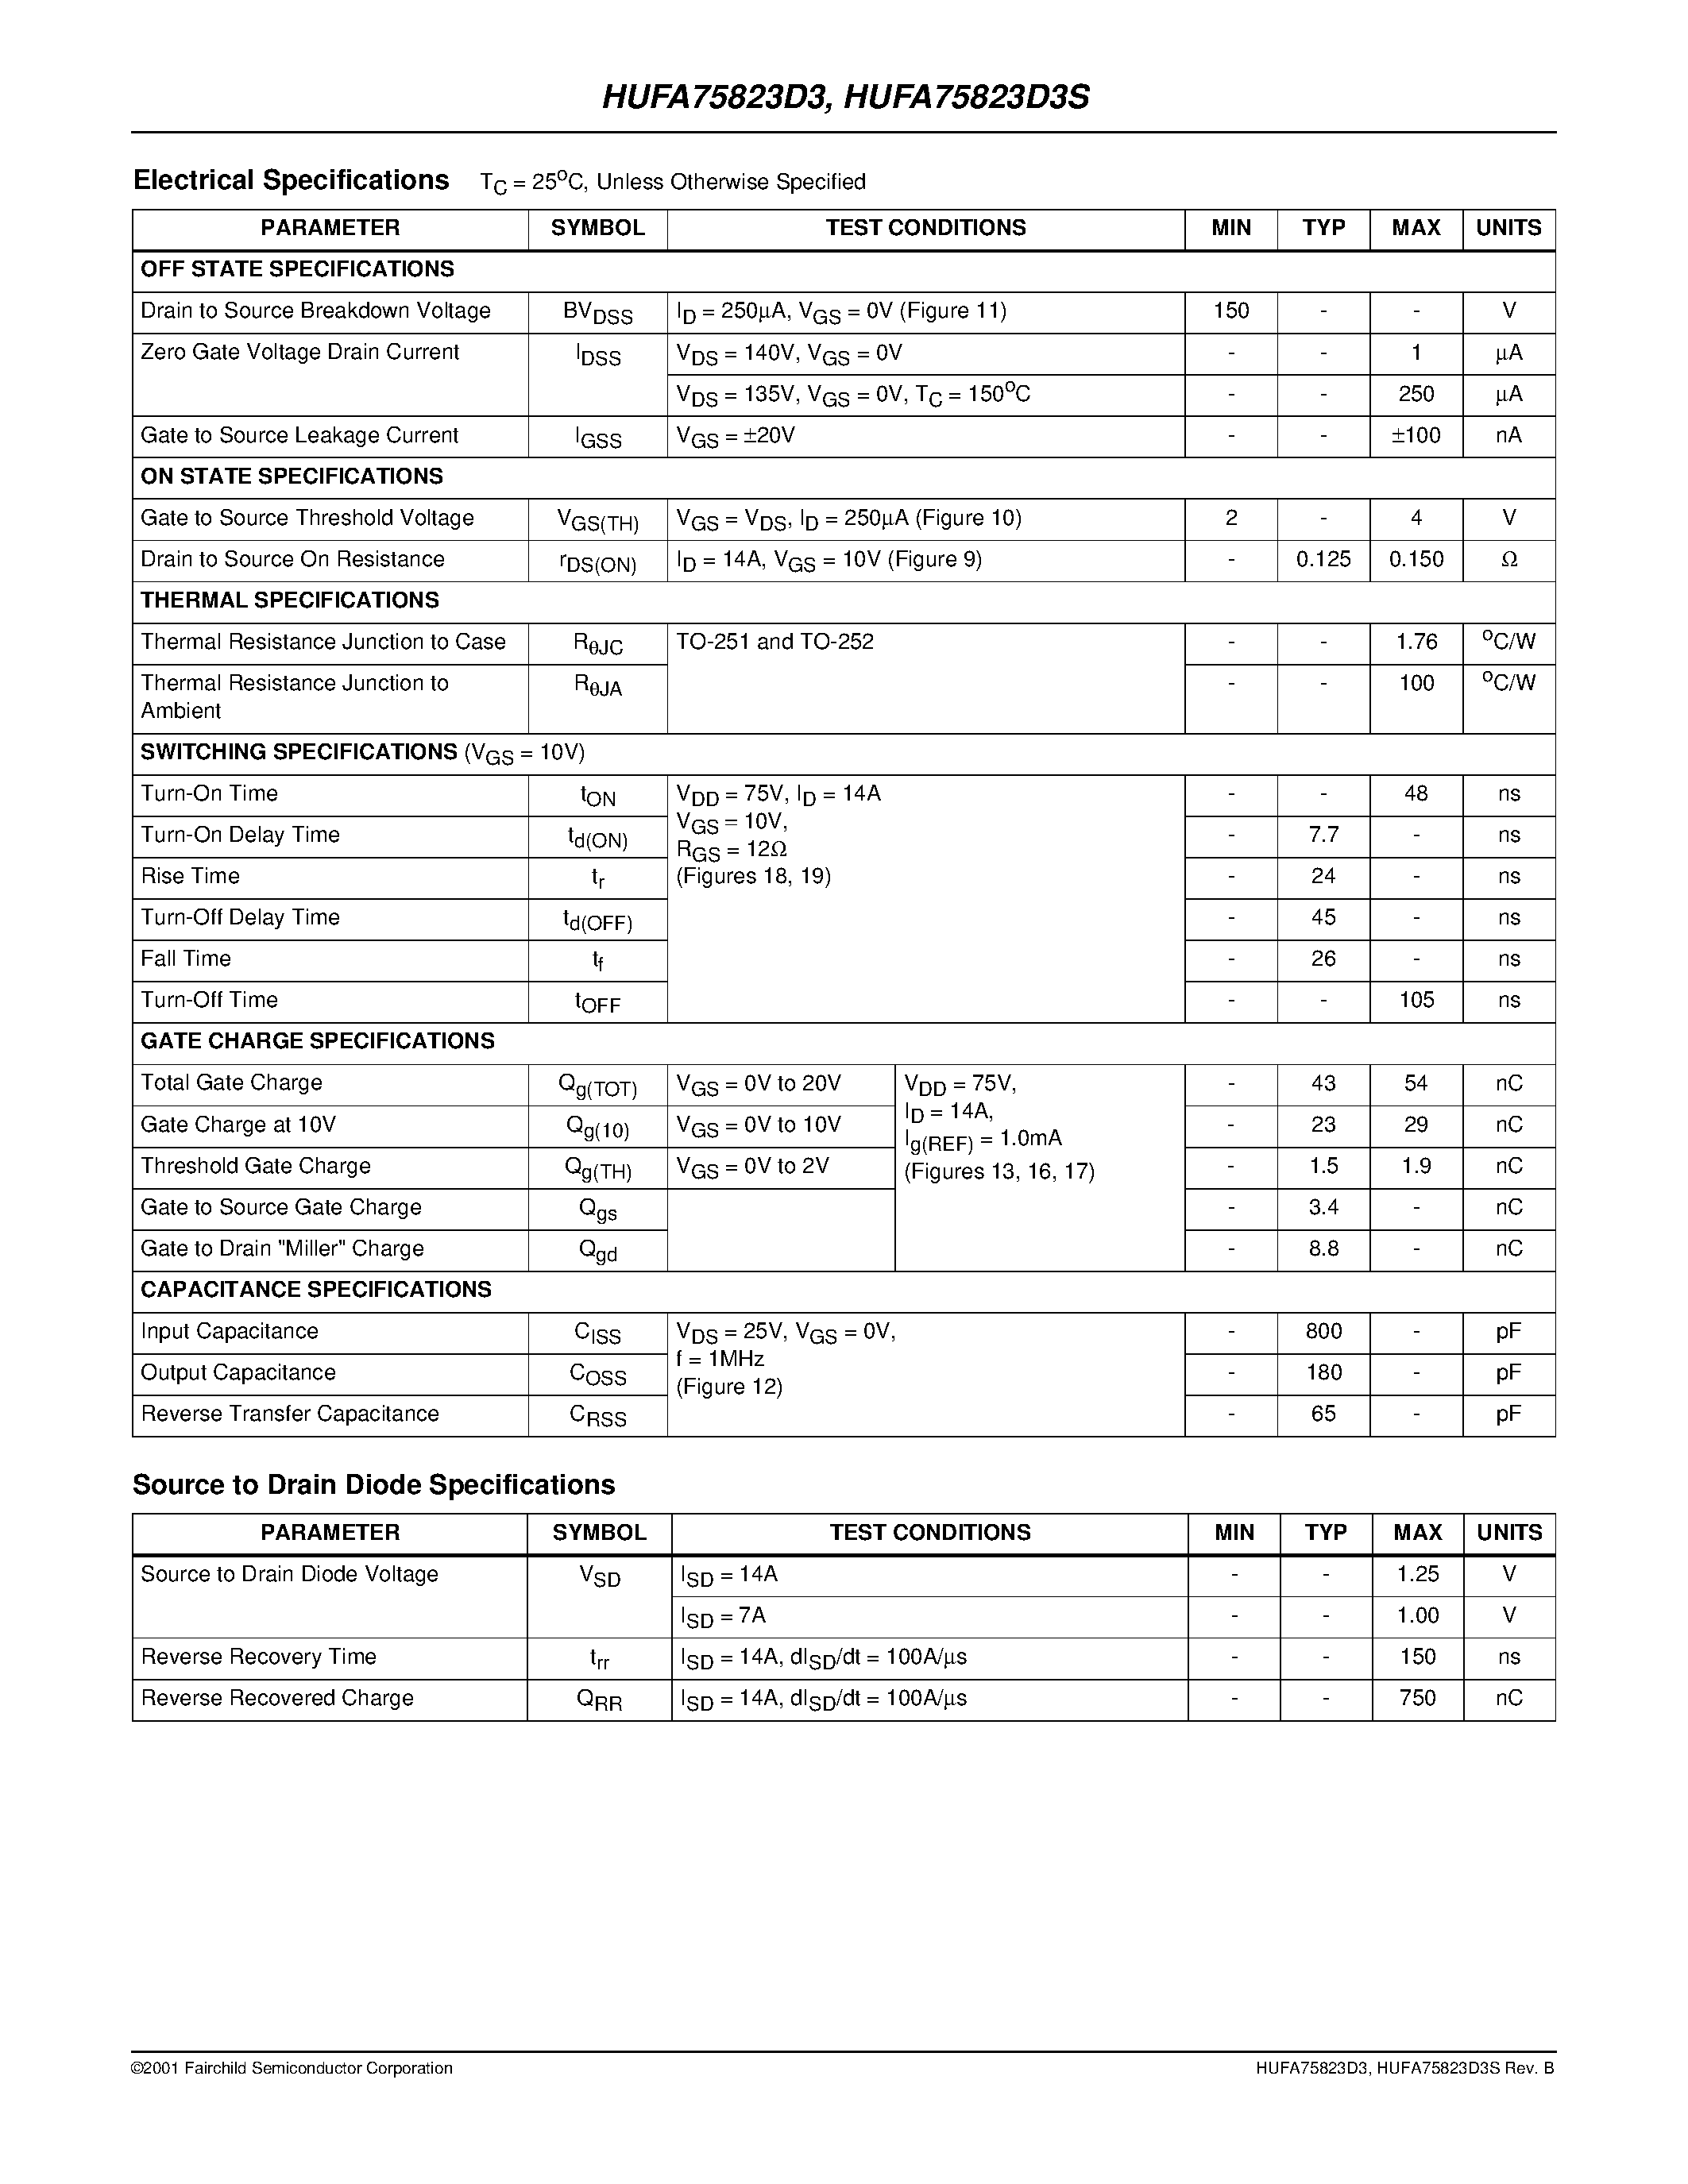 Datasheet HUFA75823D3S - 14A/ 150V/ 0.150 Ohm/ N-Channel/ UltraFET Power MOSFET page 2